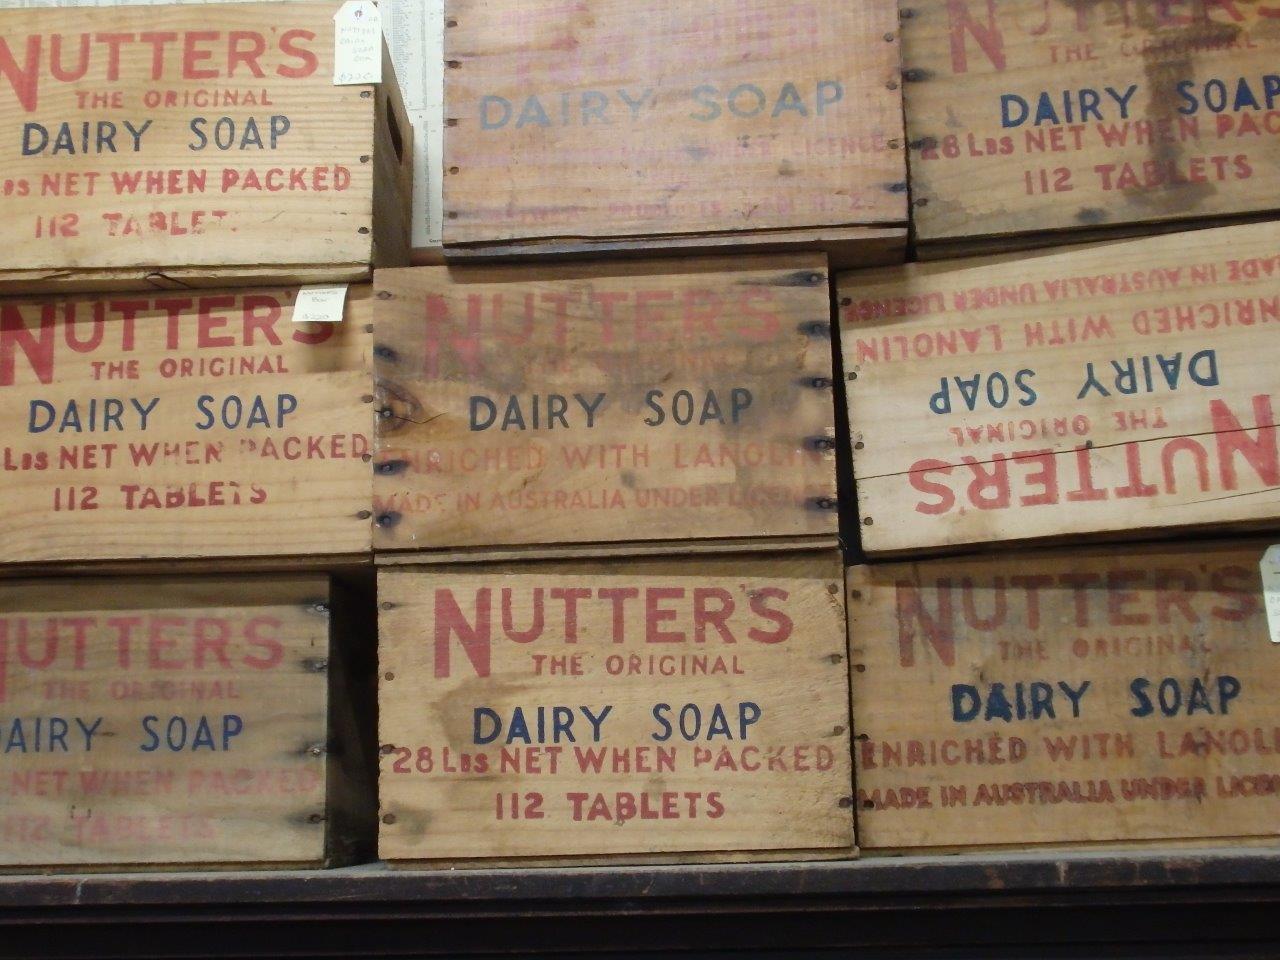 Antique Nutters dairy soap boxes for sale at Heath's Old Wares , Collectables and Industrial Antiques 19-21 Broadway Burringbar, Open 7 Days Ph 0266771181